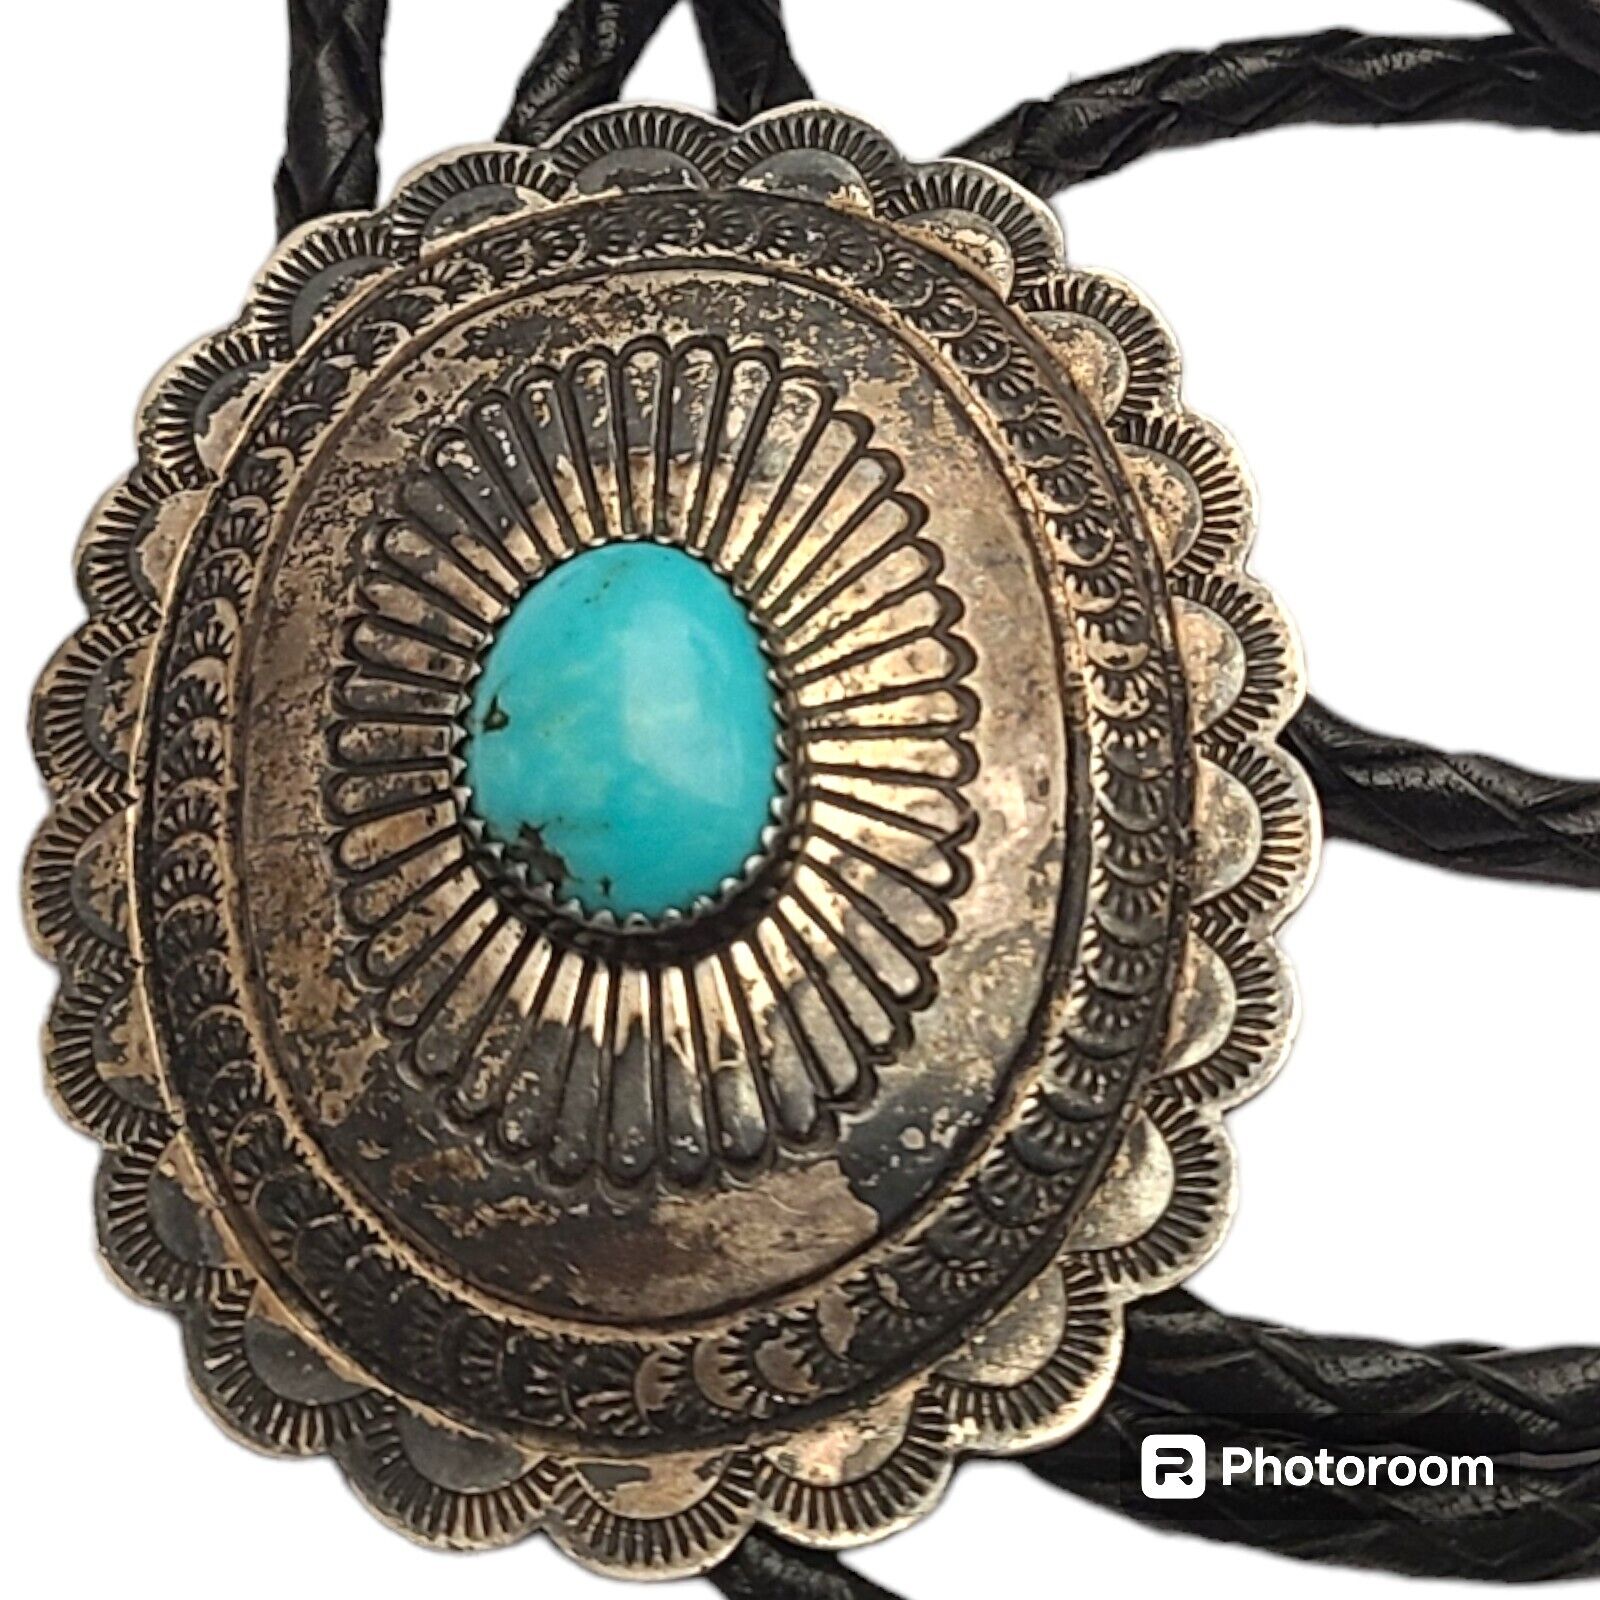 VERY INTRICATE VINTAGE NAVAJO CONCHO STERLING SILVER Bisbee Turquoise BOLO TIE